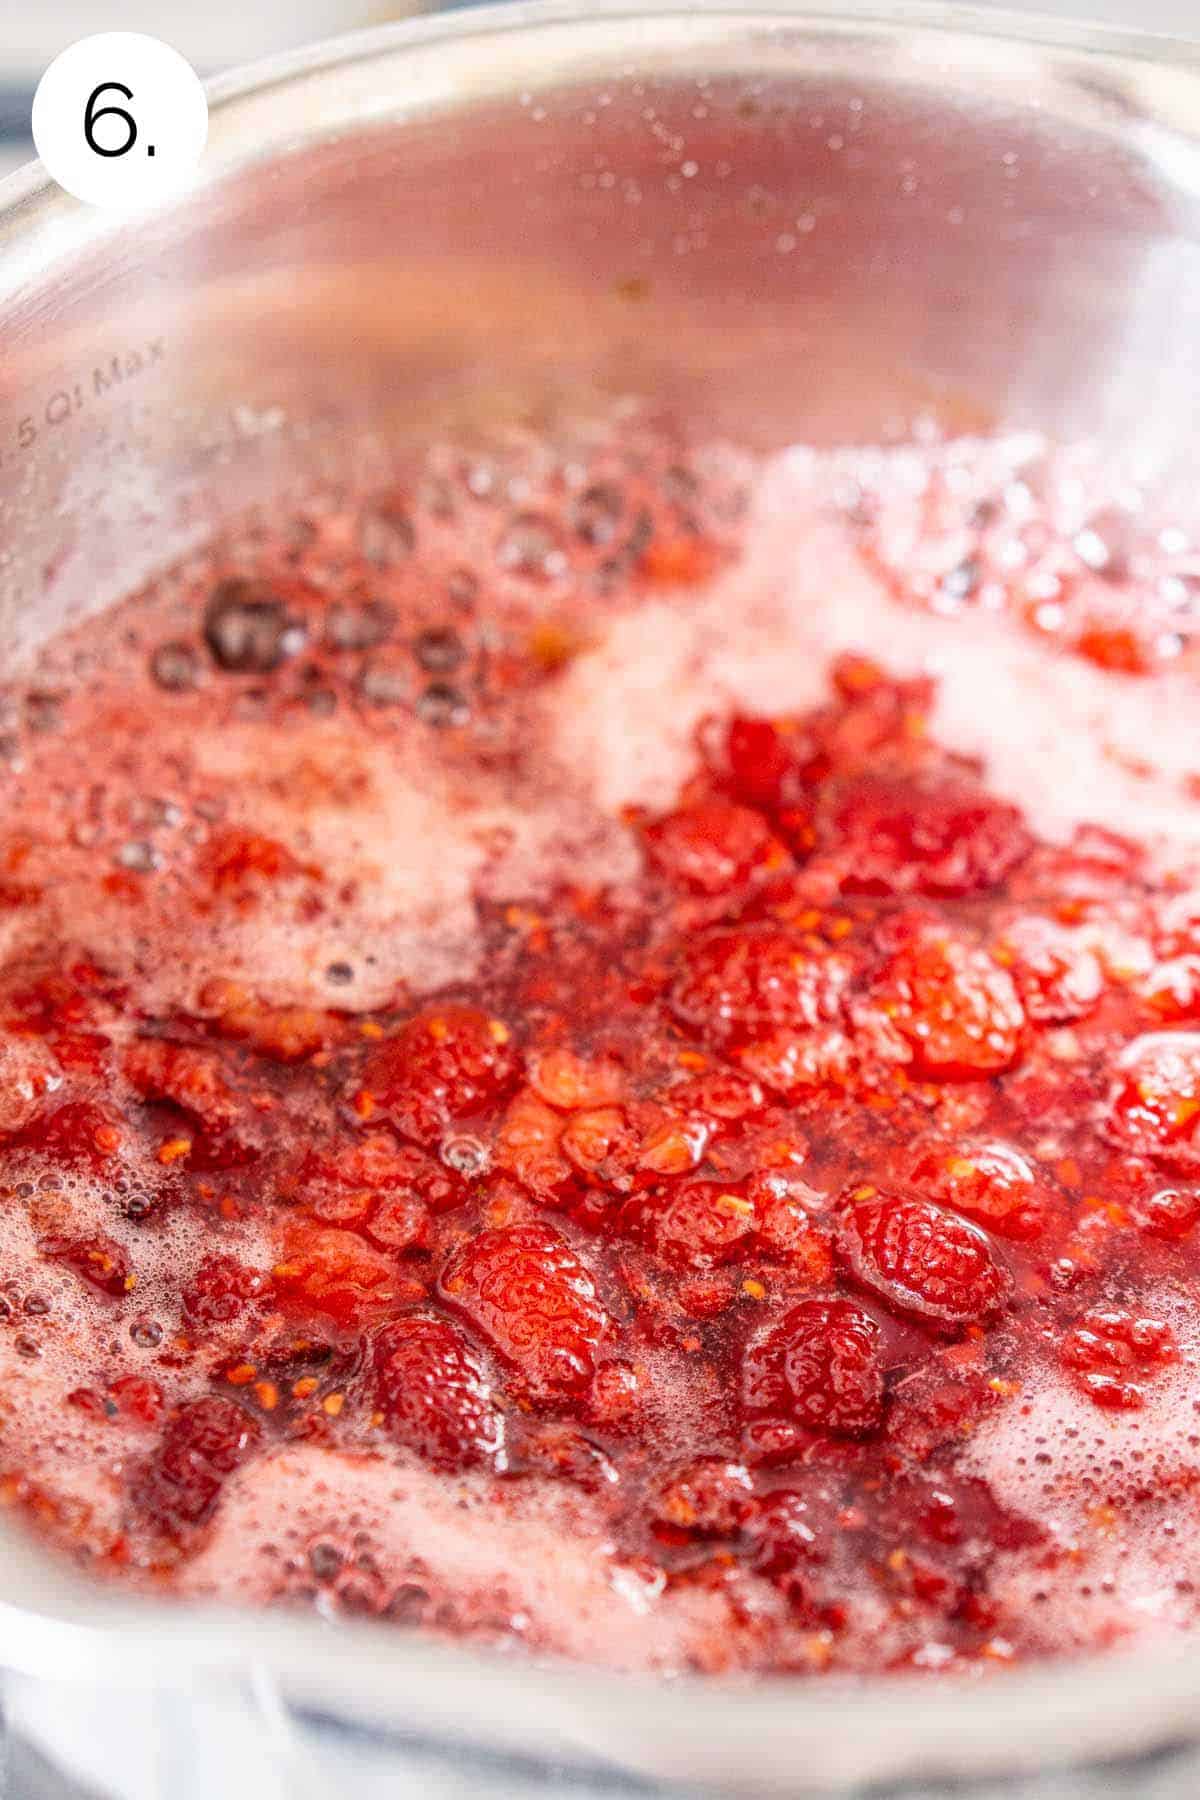 Boiling the water, sugar and raspberries in a small stainless steel saucepan on the stove to make the syrup.